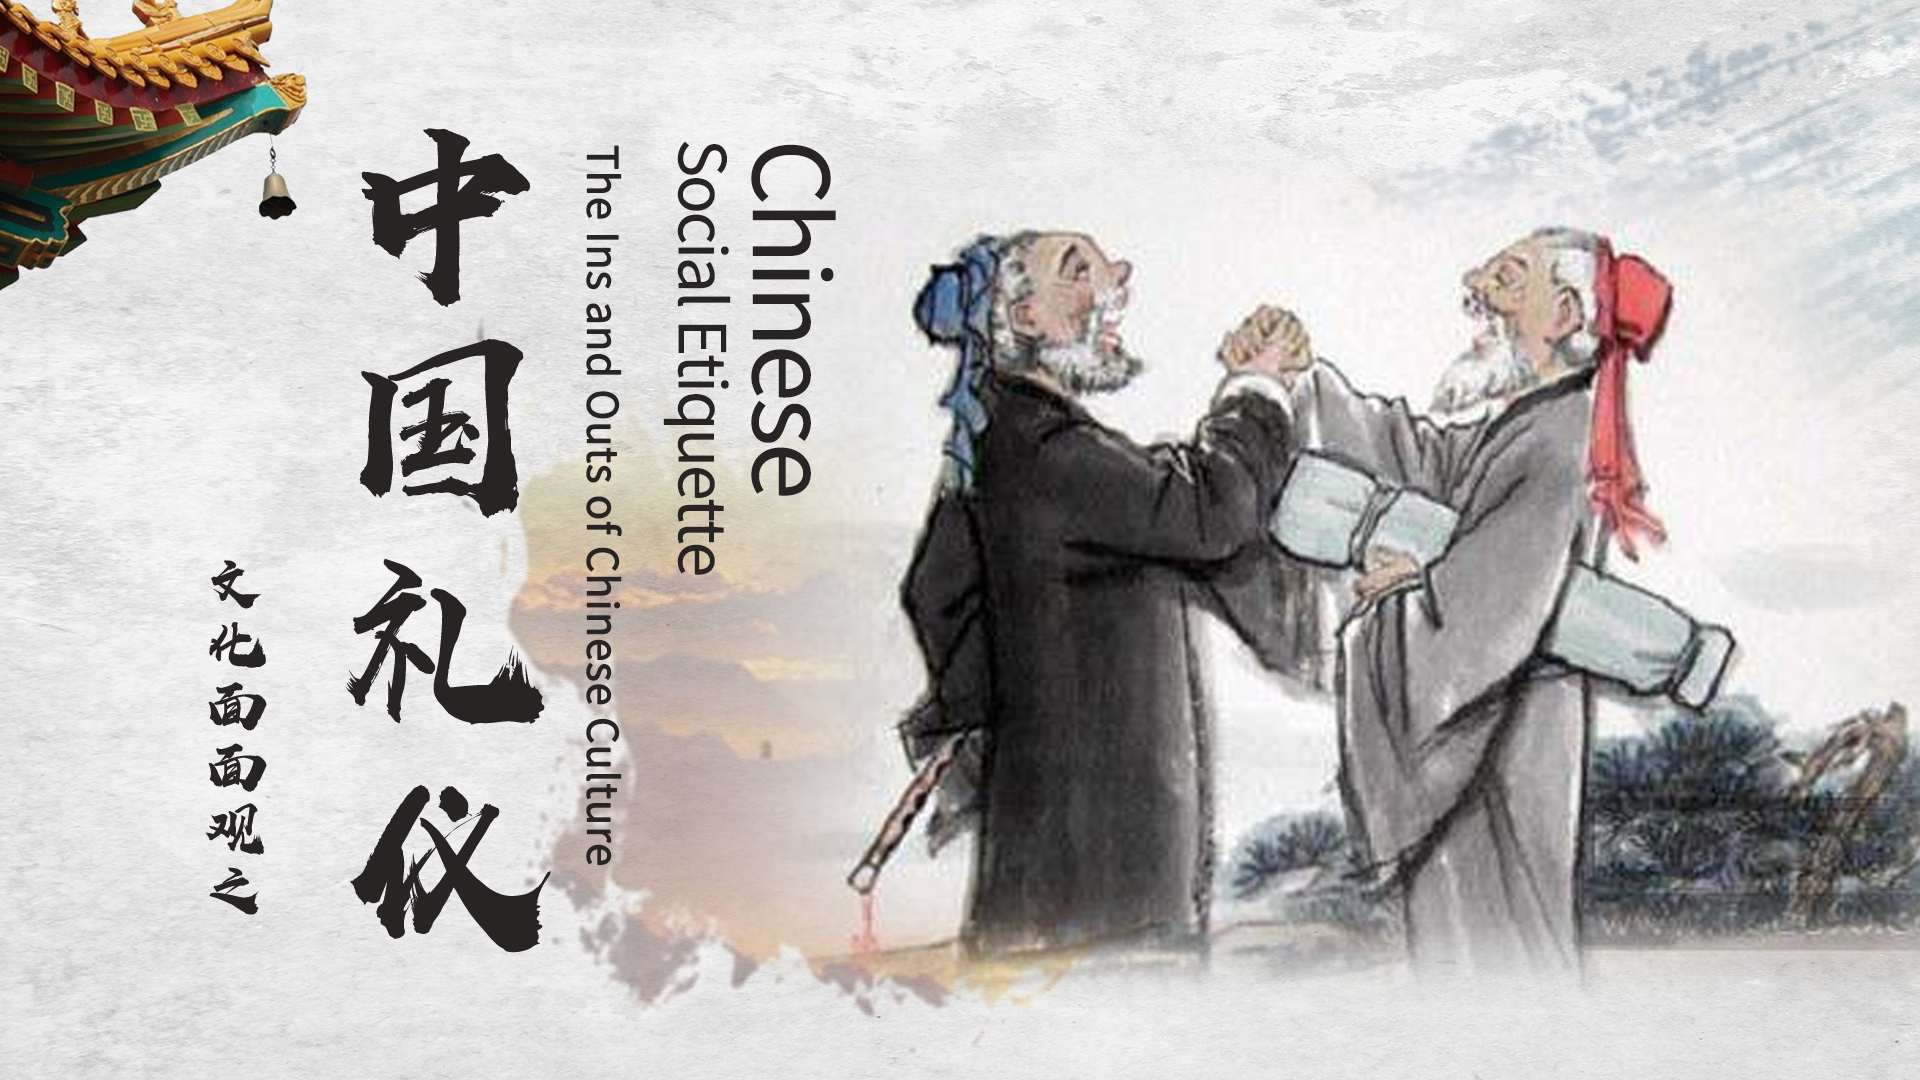 The Ins and Outs of Chinese culture: Chinese Social Etiquette